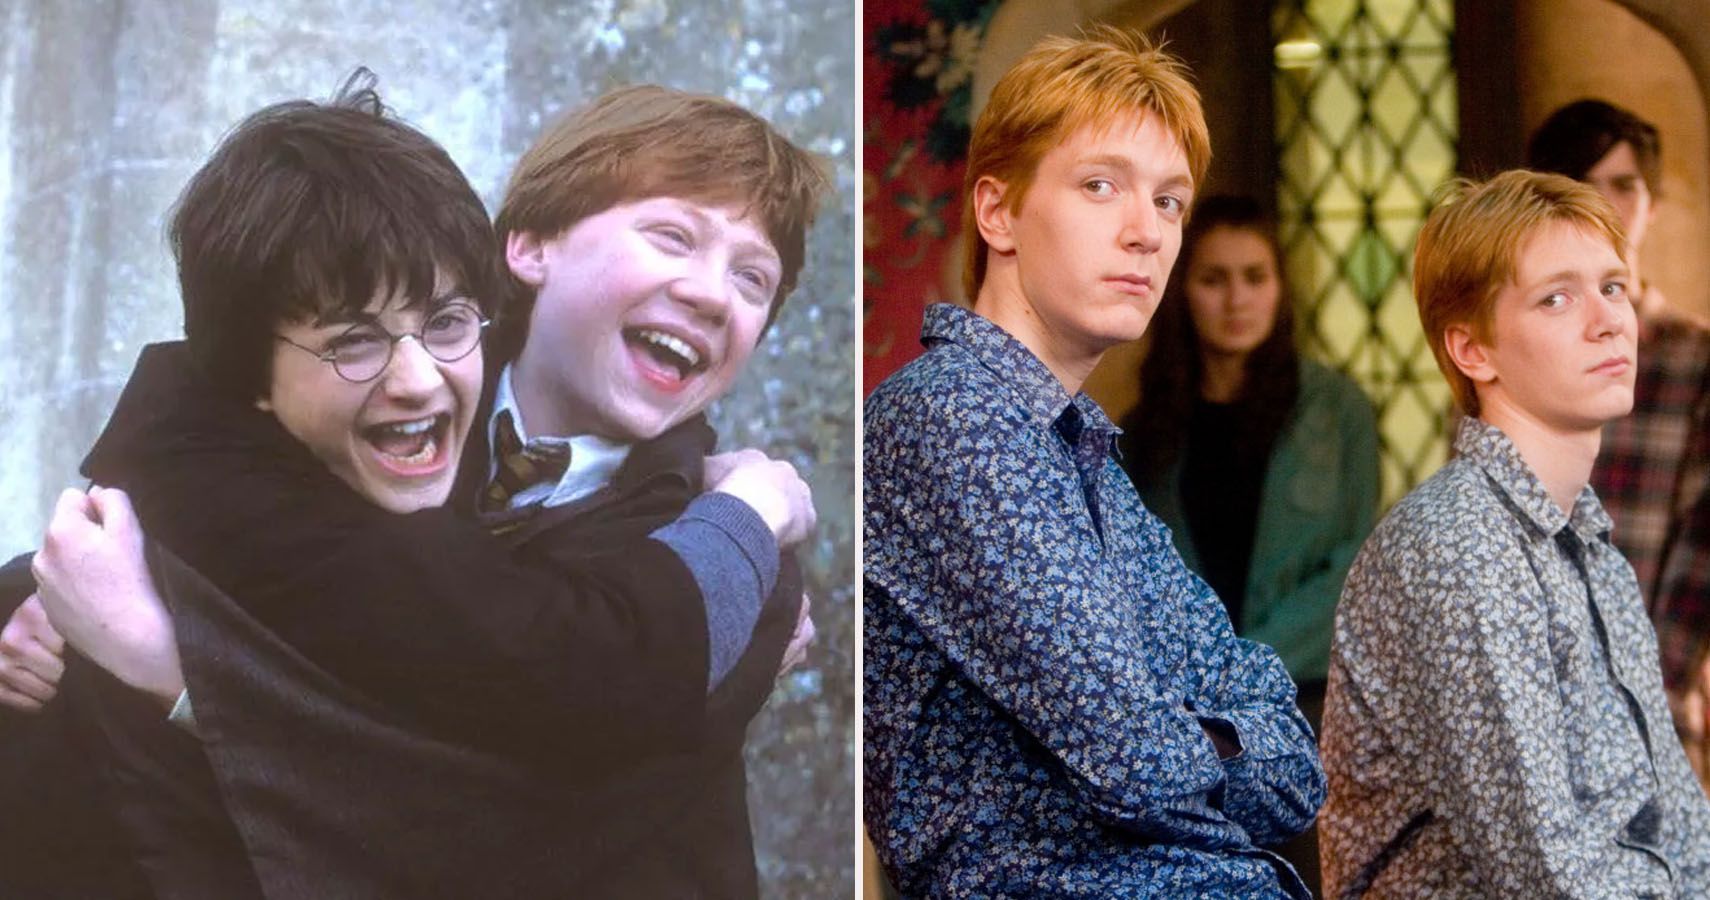 BFF Goals 10 Harry Potter Characters We Want To Be Friends With IRL RELATED Harry Potter Every BFWorthy Gryffindor Character Ranked